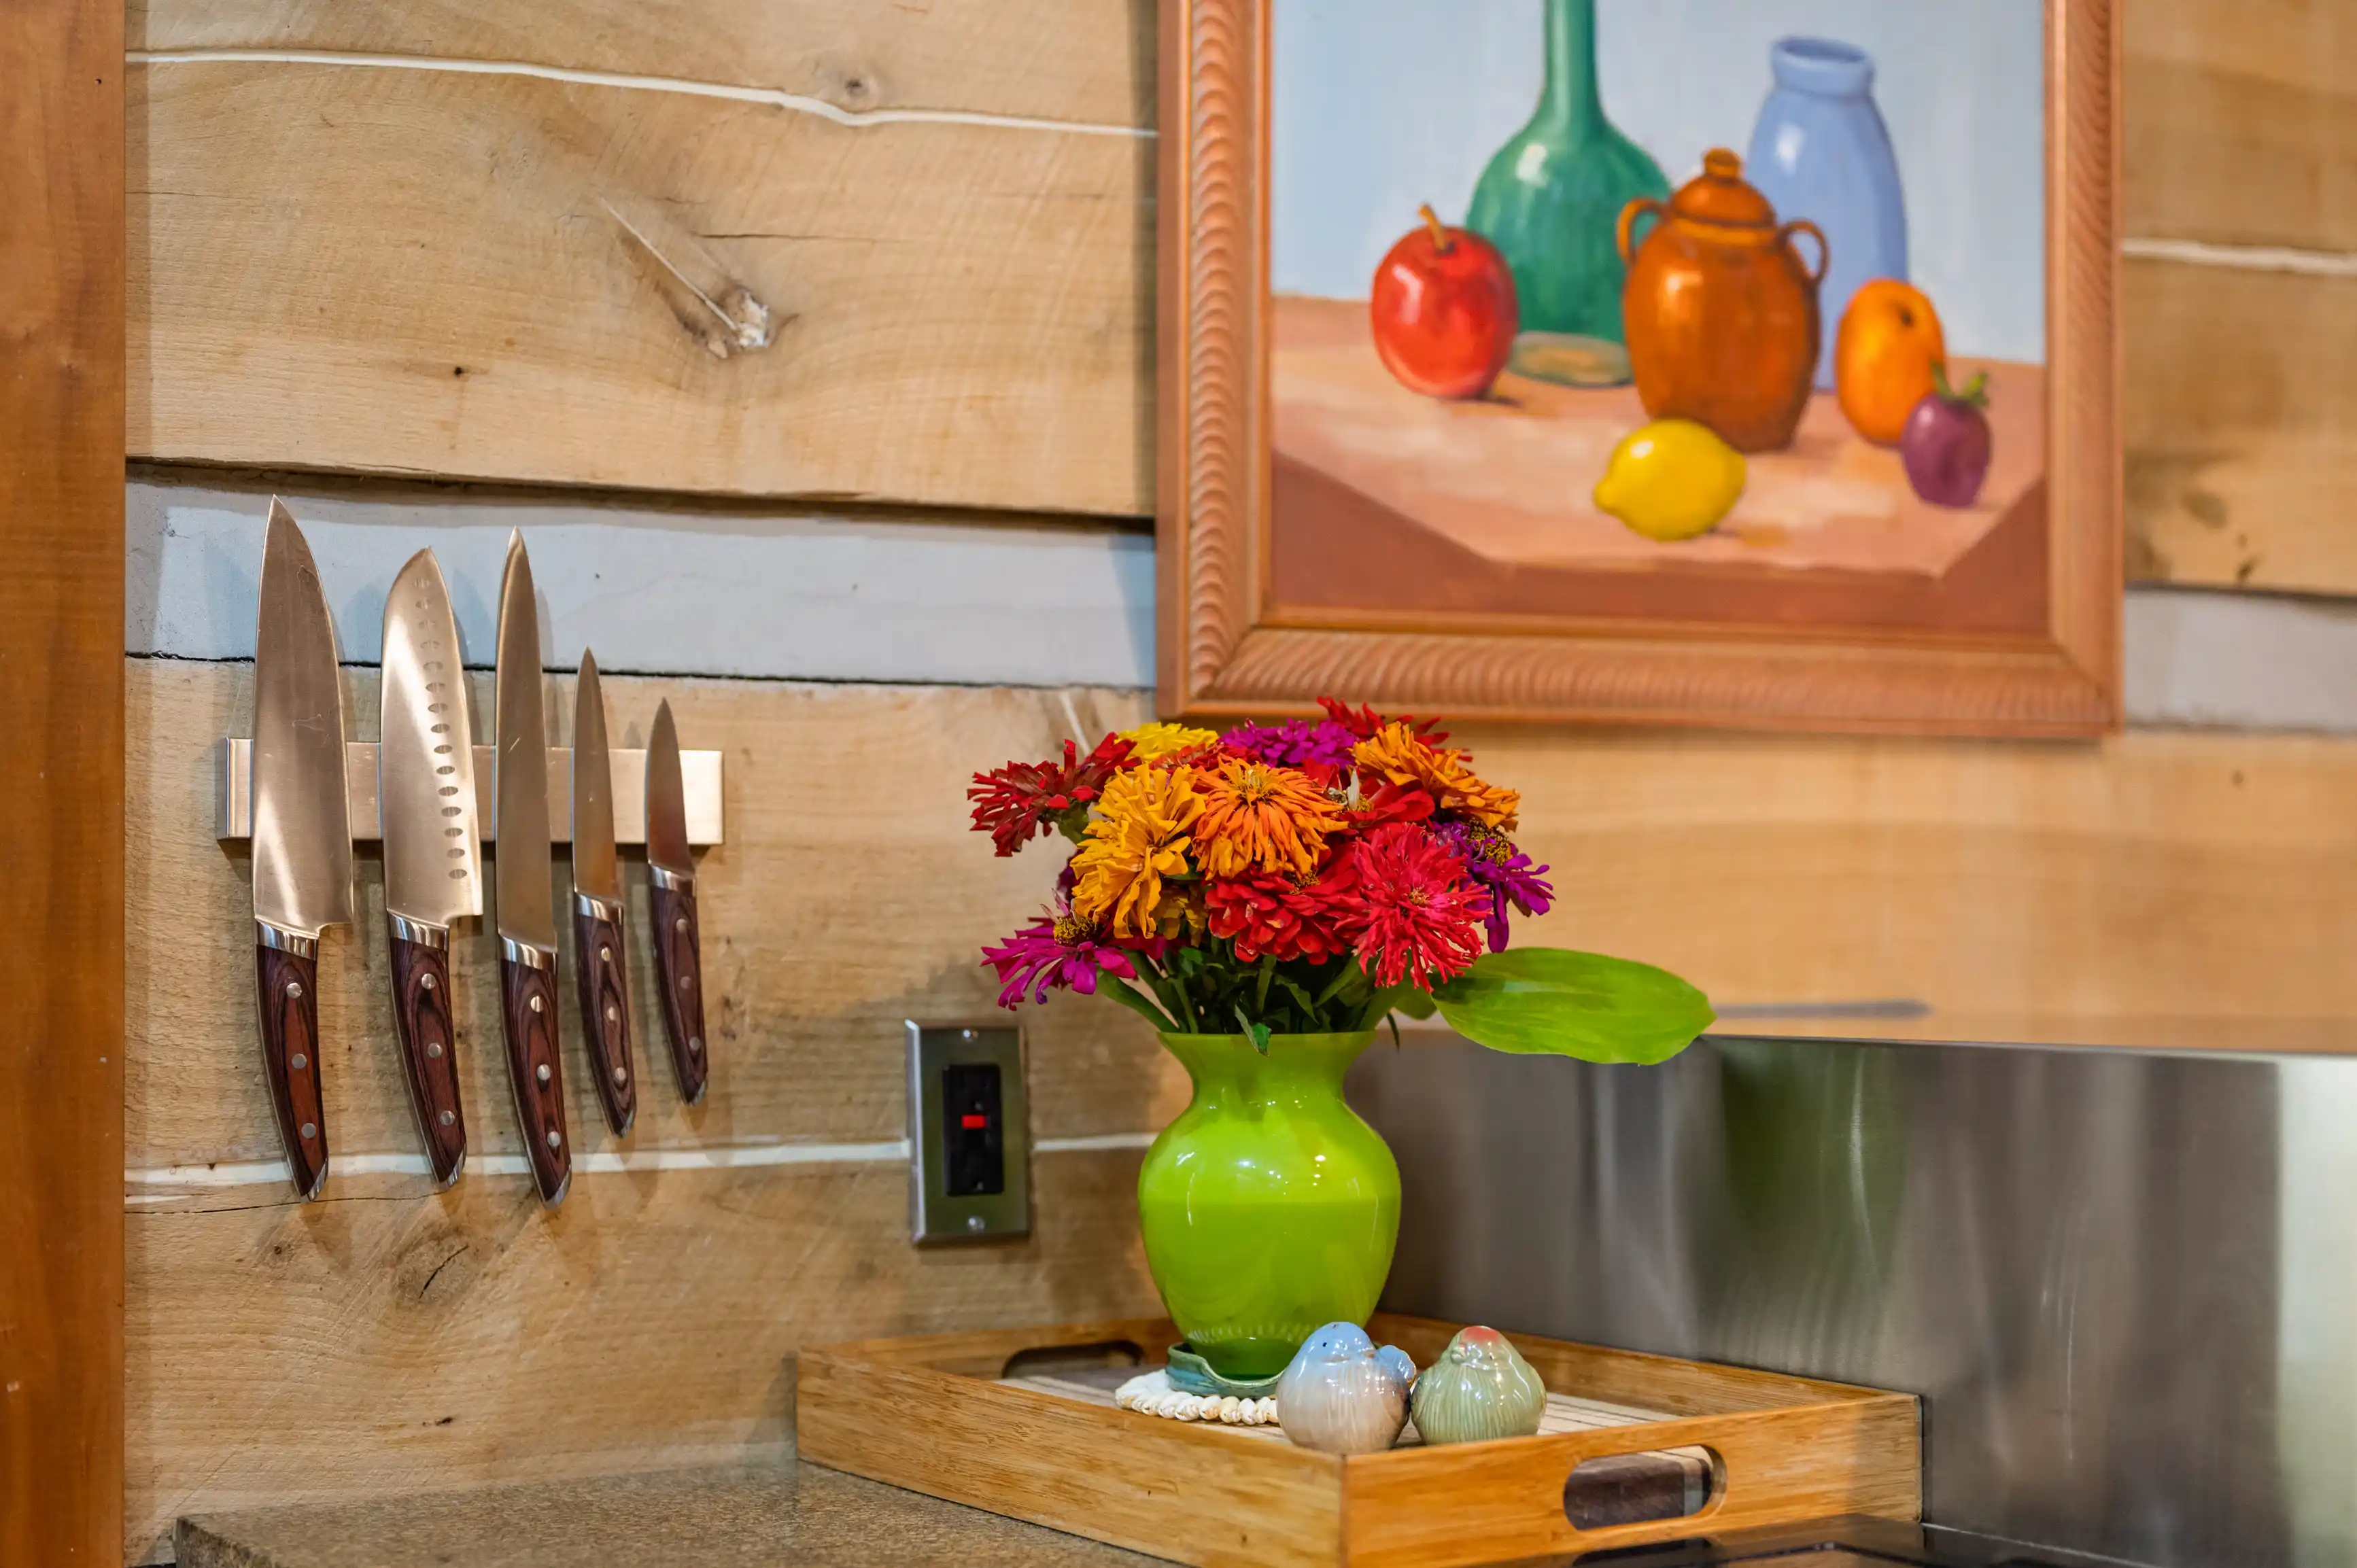 Rustic kitchen setting with a colorful flower bouquet in a green vase, a set of knives on a magnetic strip, and a framed painting of pottery and fruit.